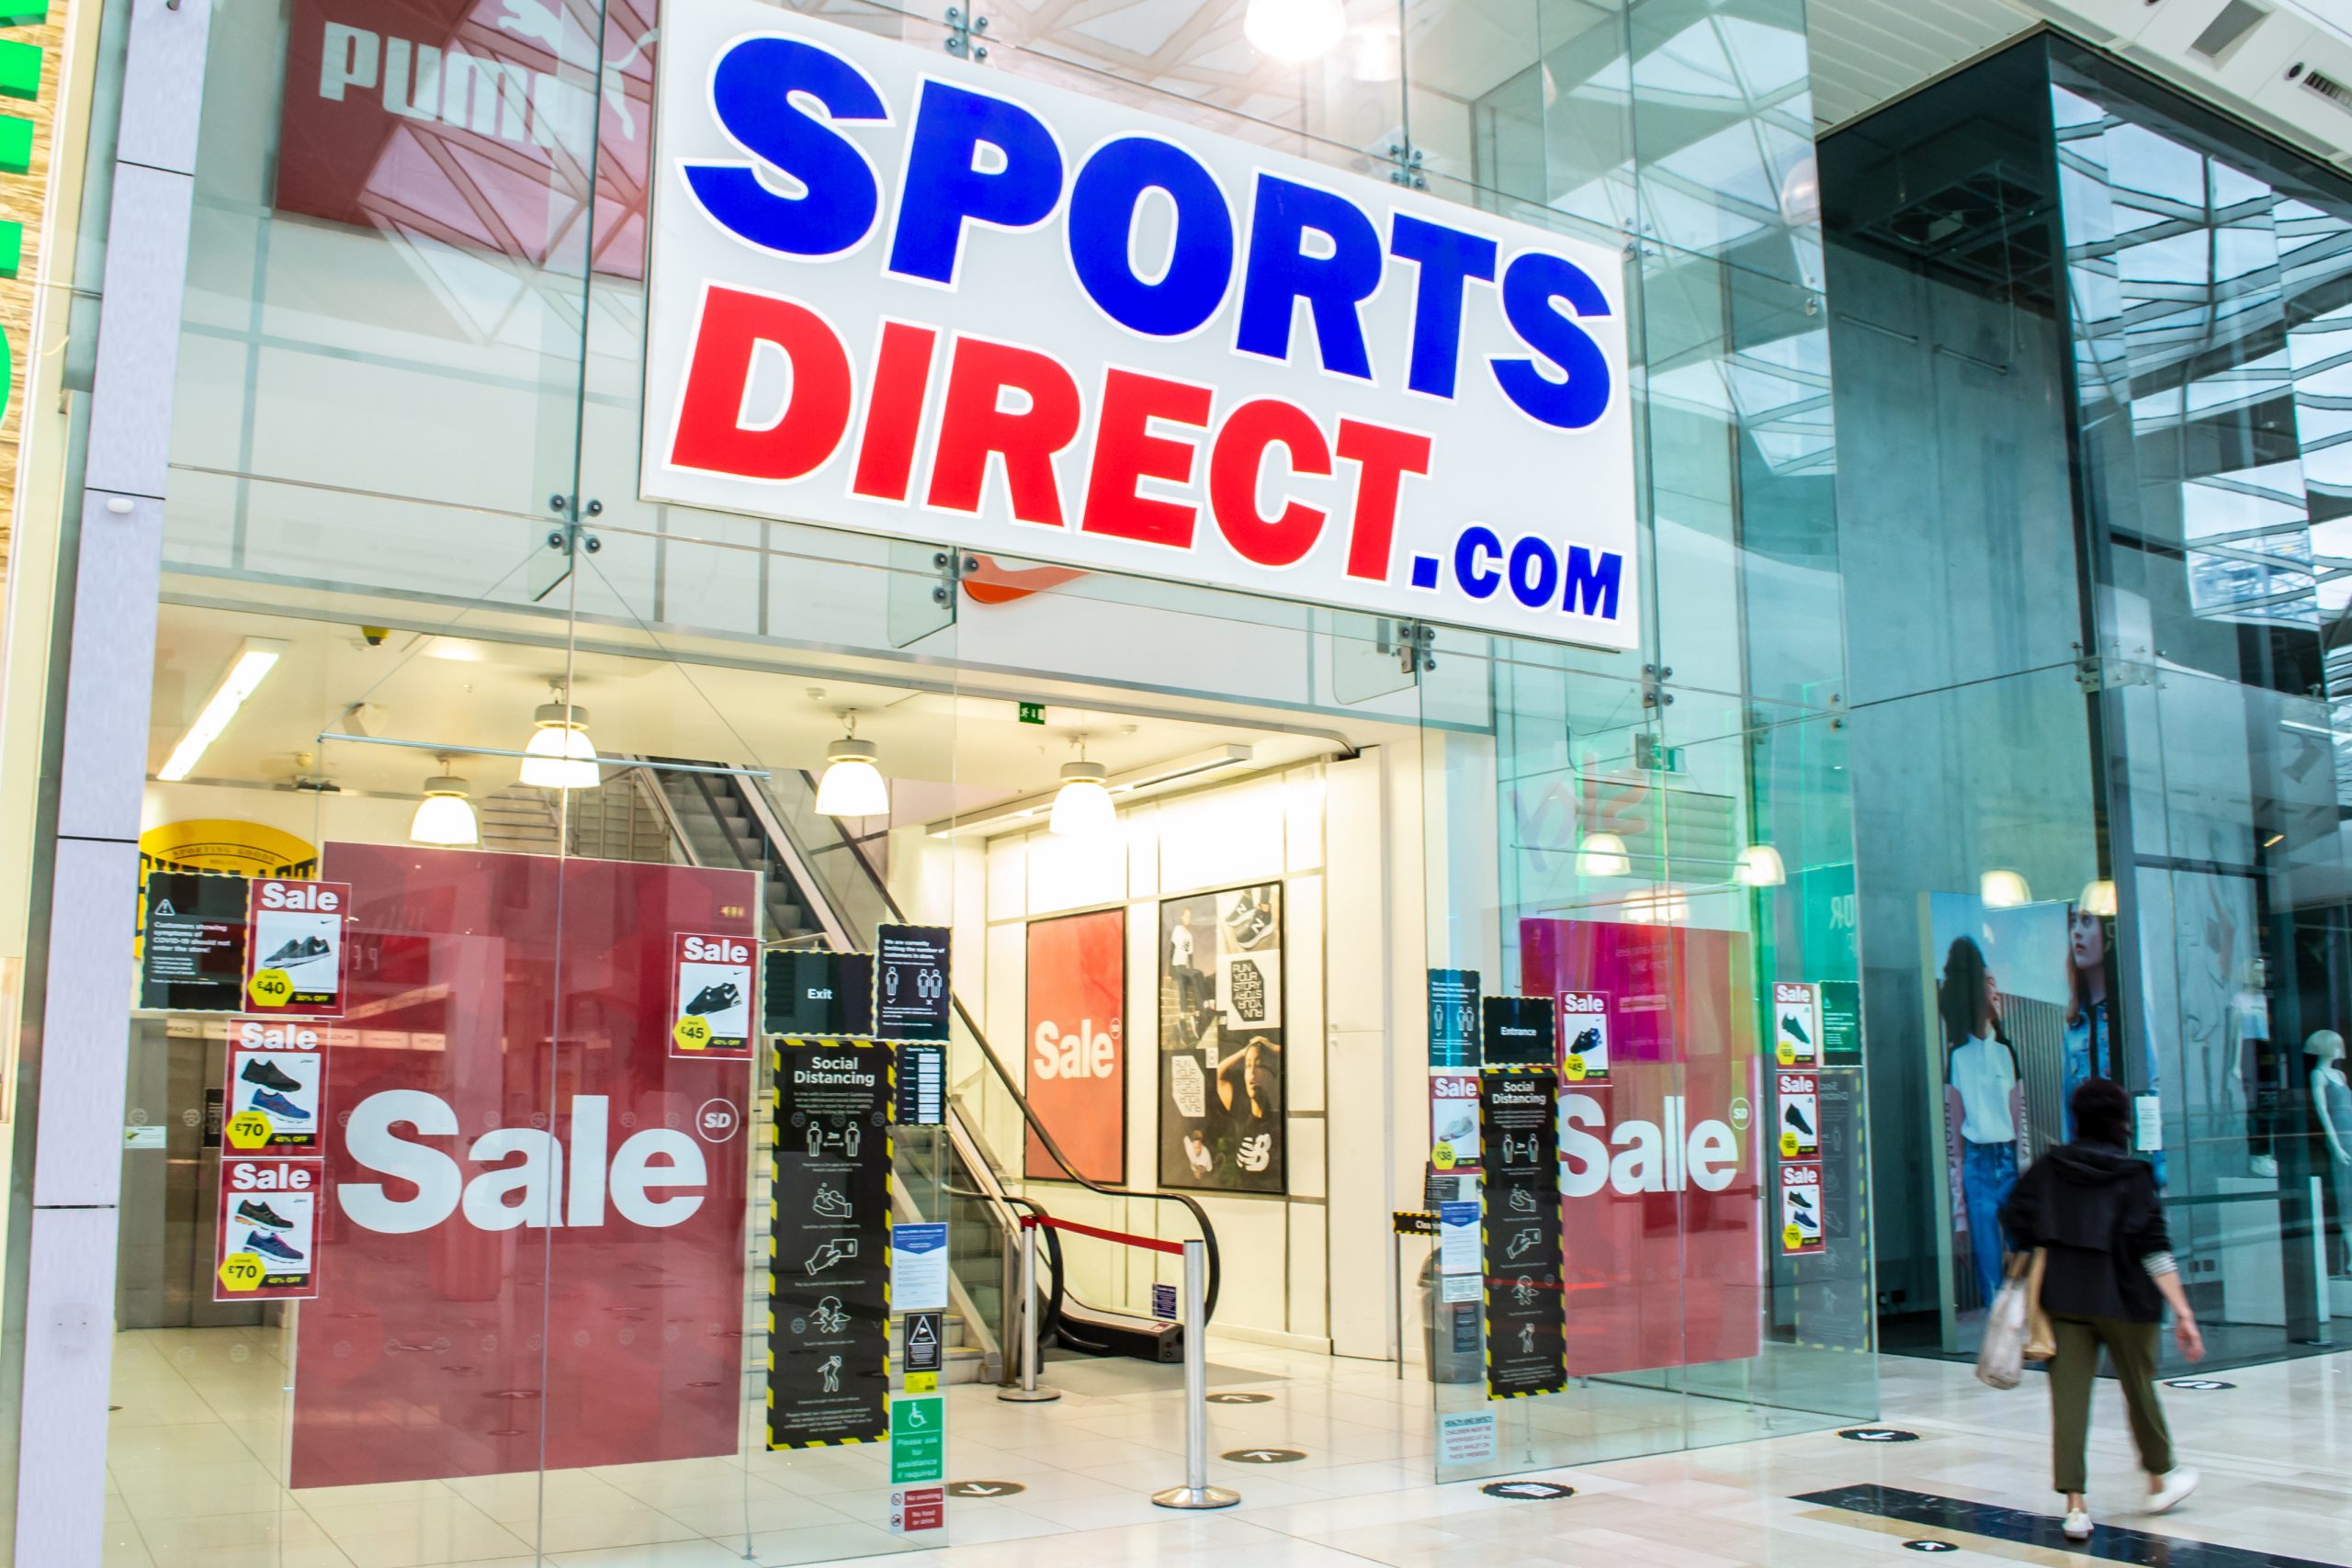 Sports Direct auditor fined for 'serious failings' - Retail Gazette